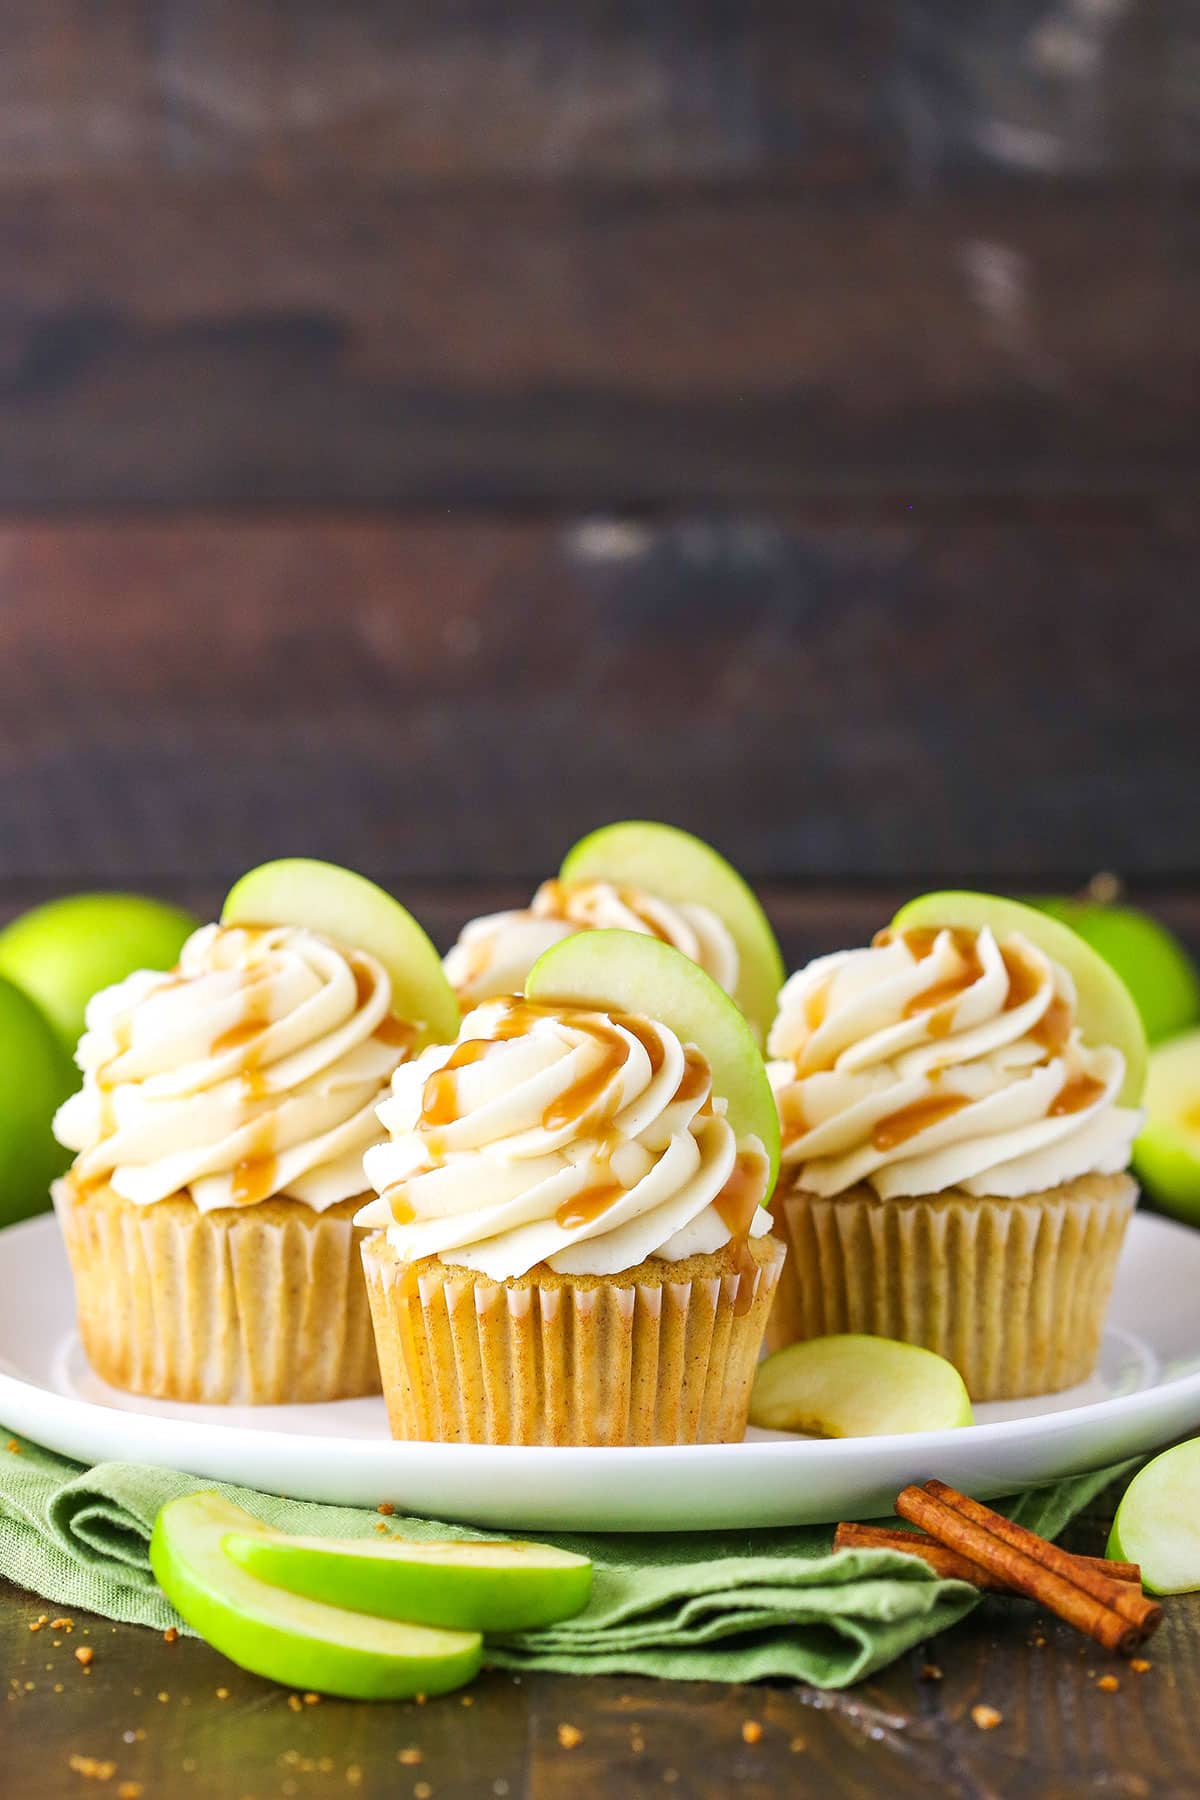 Caramel Apple Cupcakes topped with frosting swirls, a slice of apple and caramel sauce